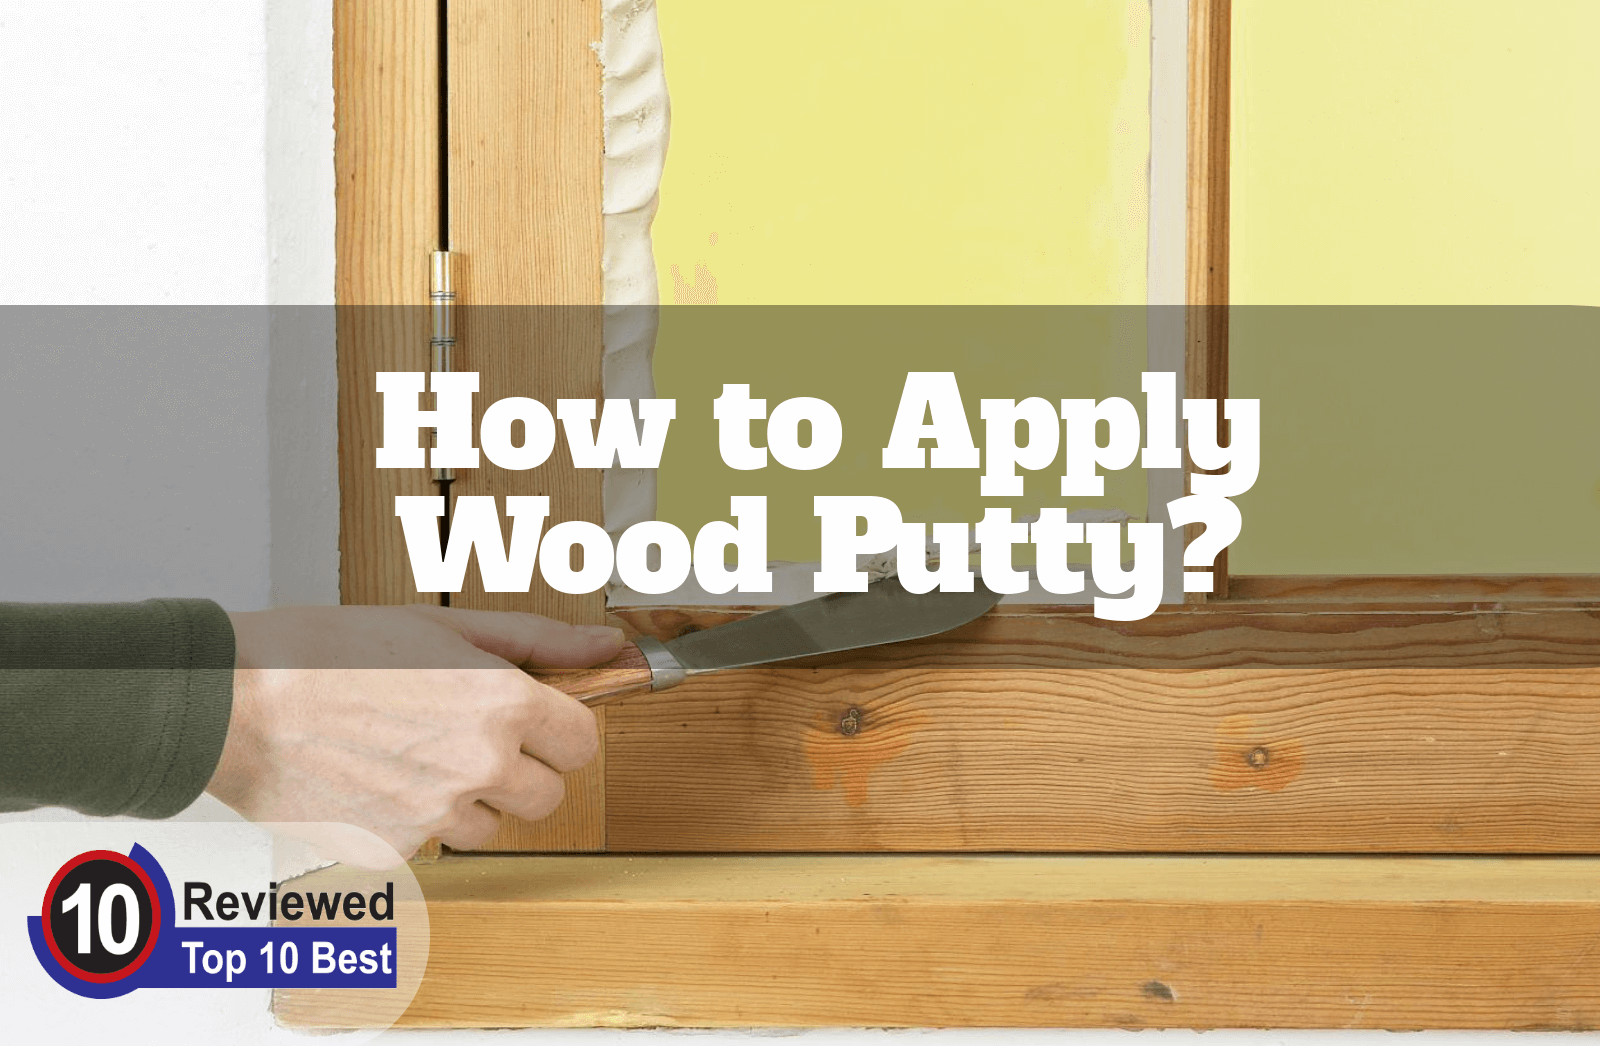 How long does wood putty take to dry